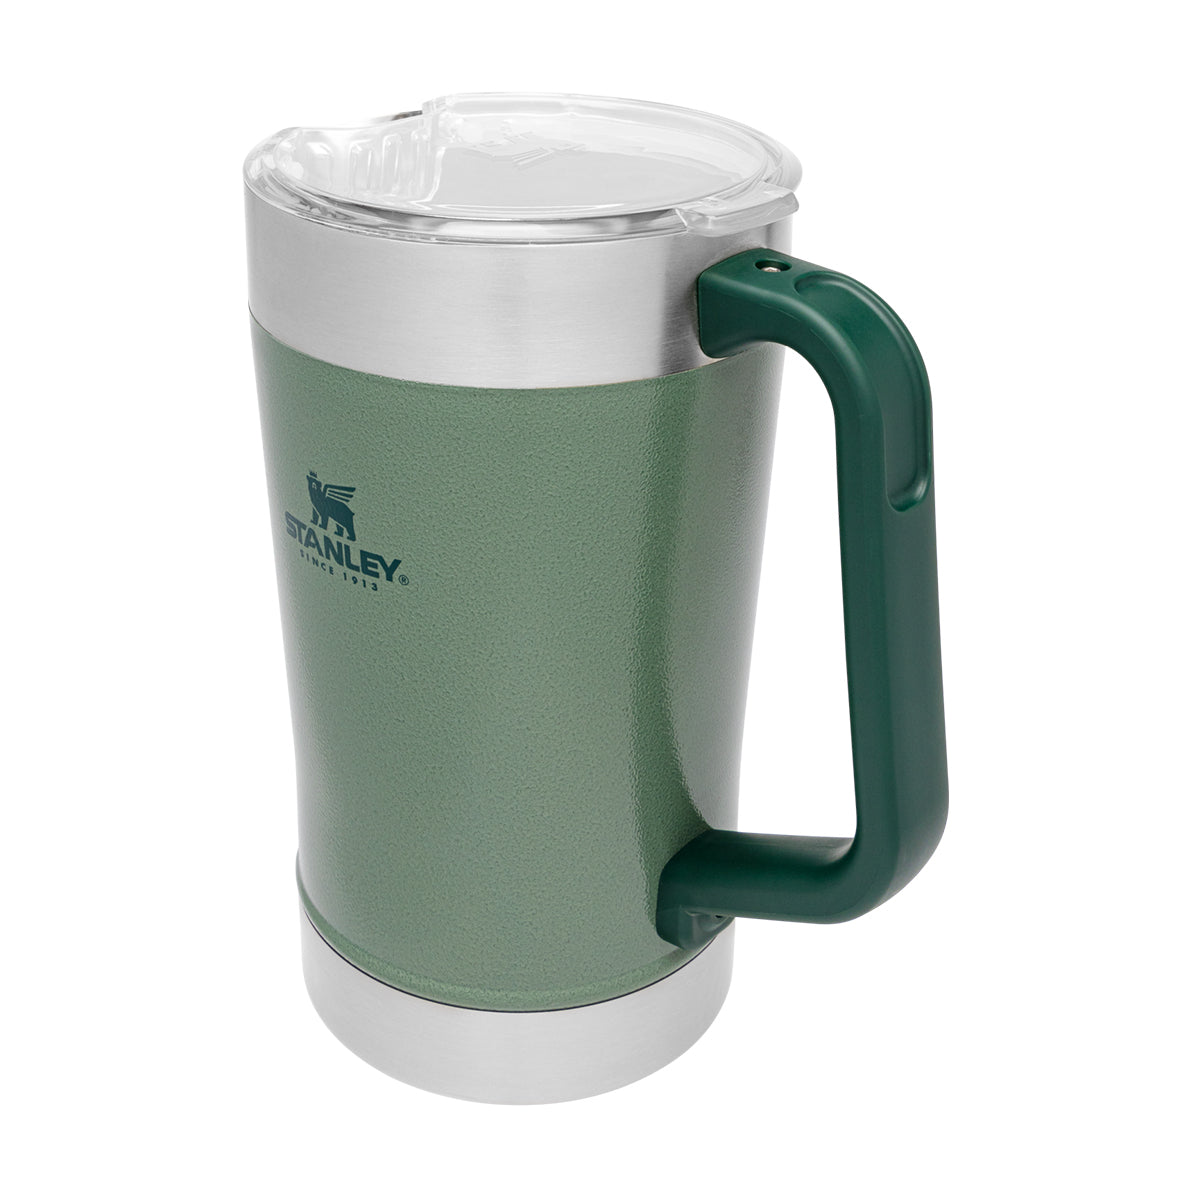 Stanley classic Stay Chill pitcher set